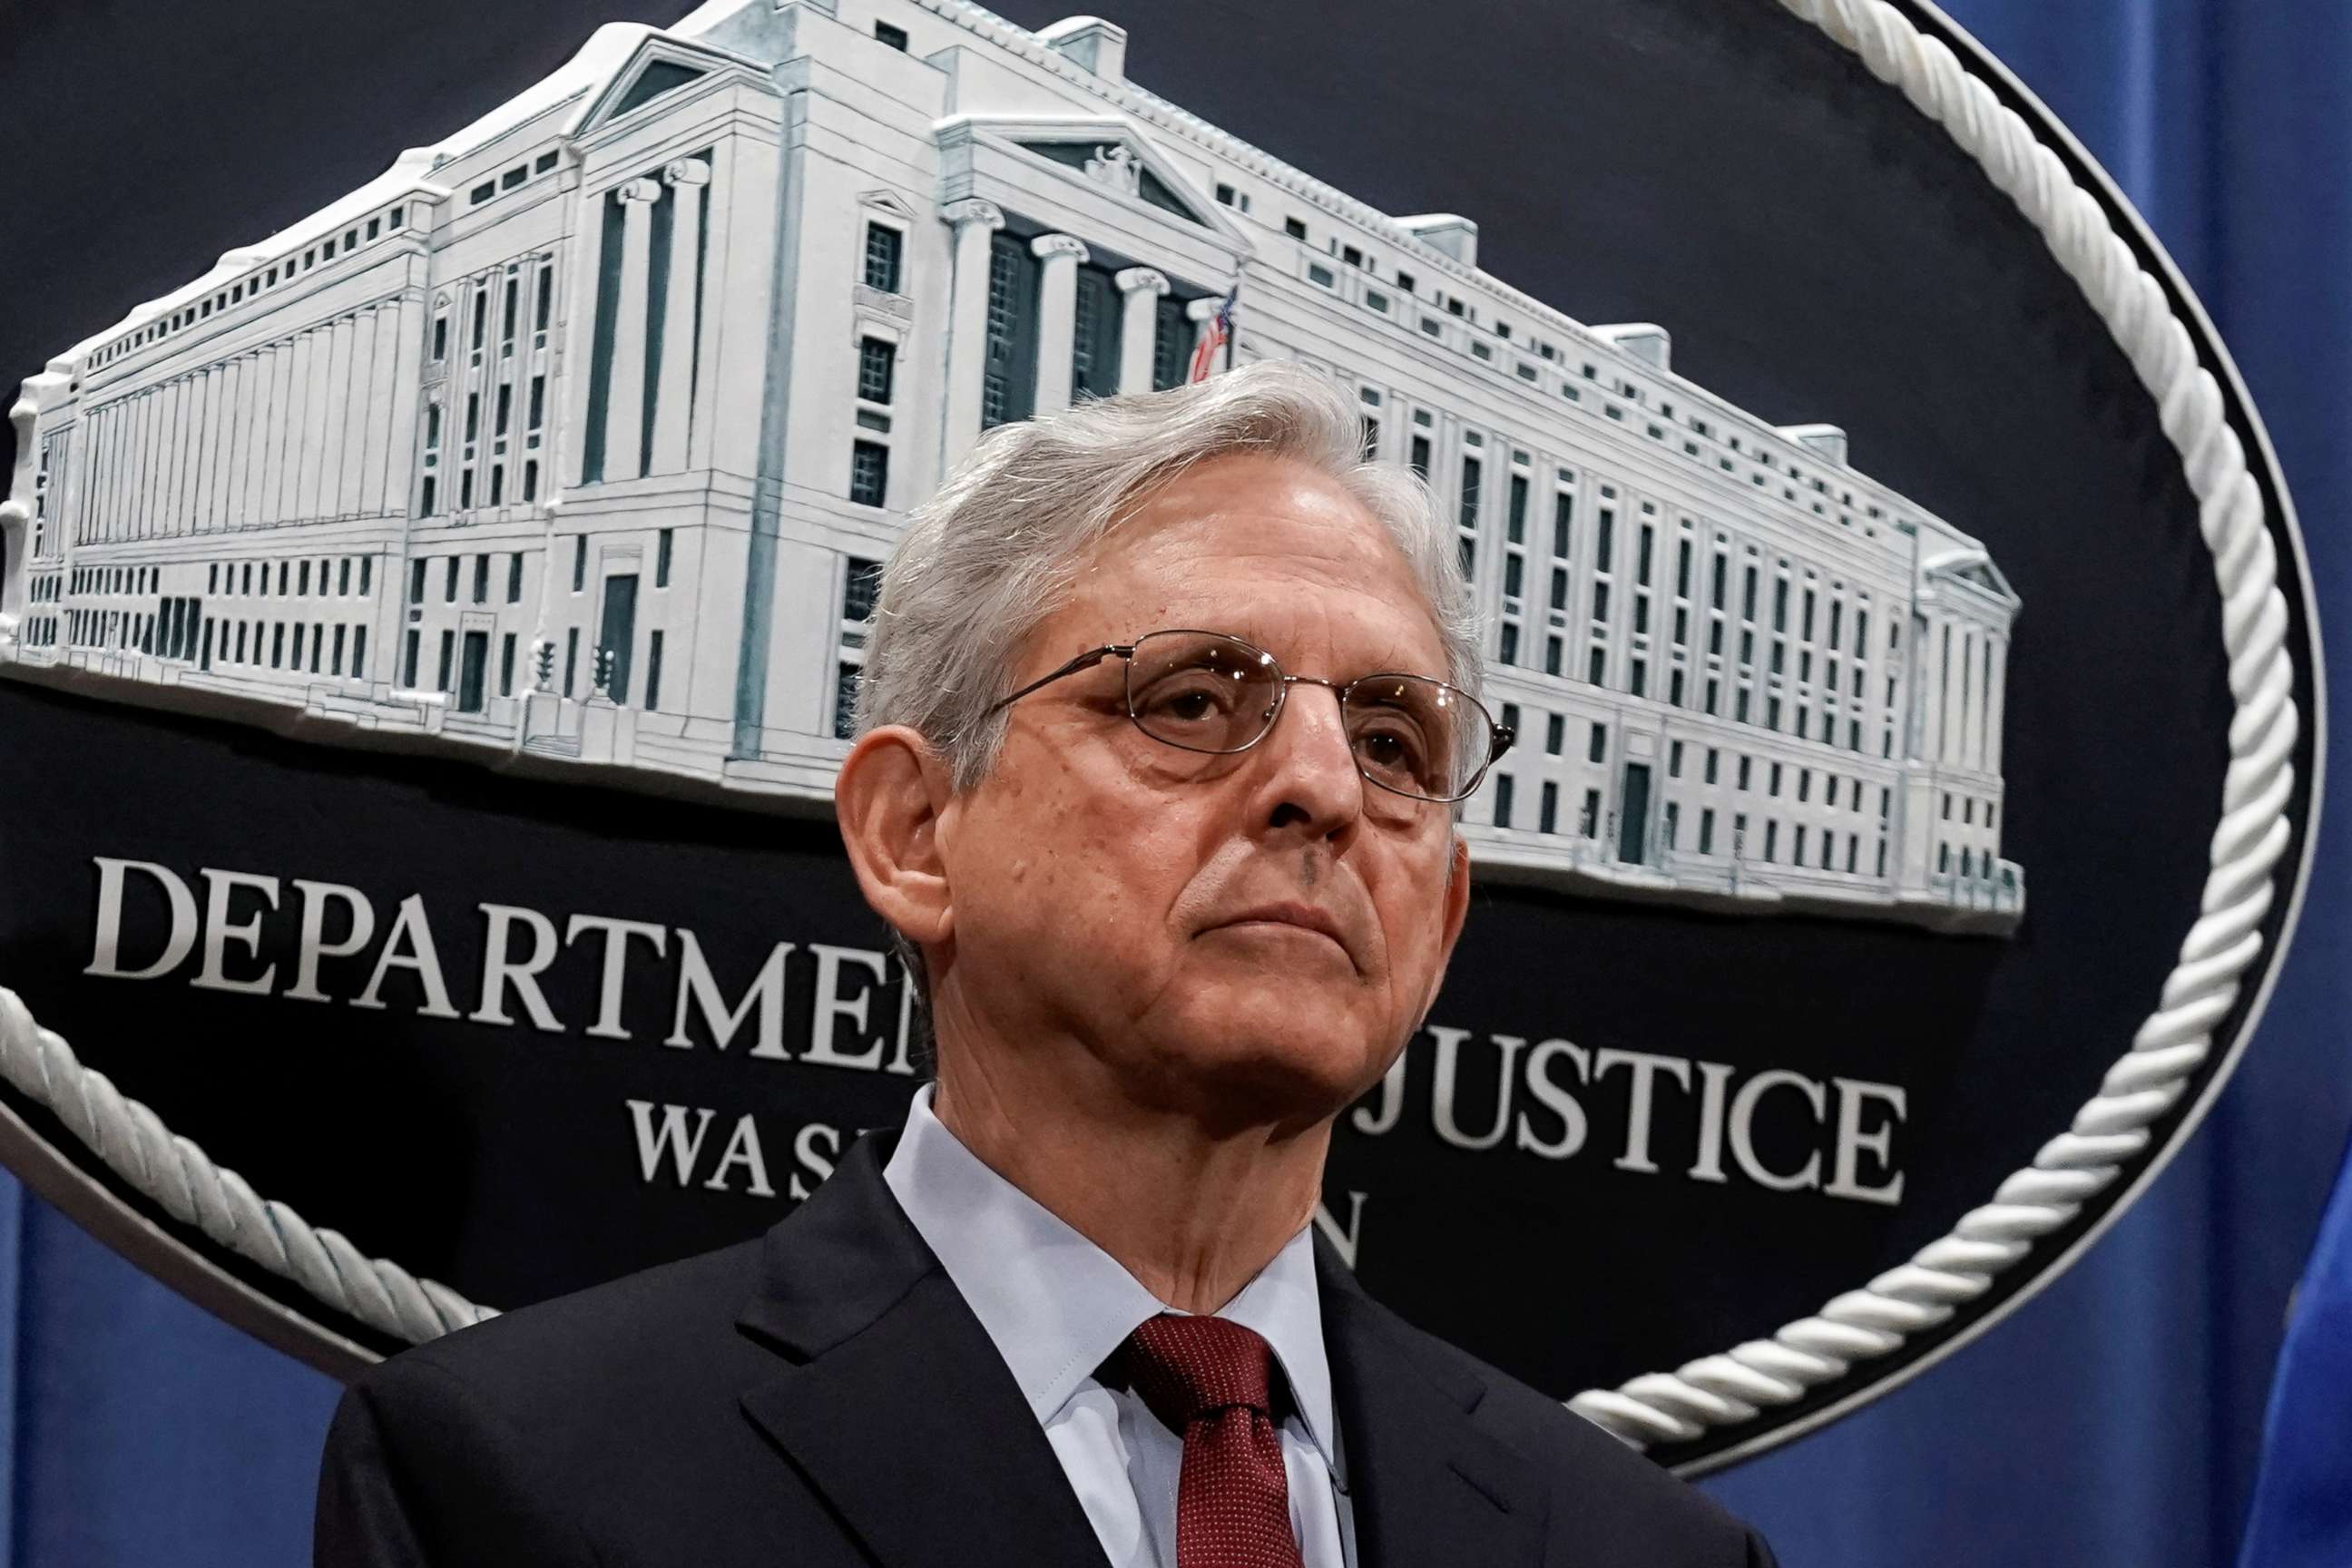 PHOTO: Attorney General Merrick Garland attends a news conference to announce that the Justice Department will file a lawsuit challenging a Georgia election law that imposes new limits on voting, at the Department of Justice in Washington, June 25, 2021.